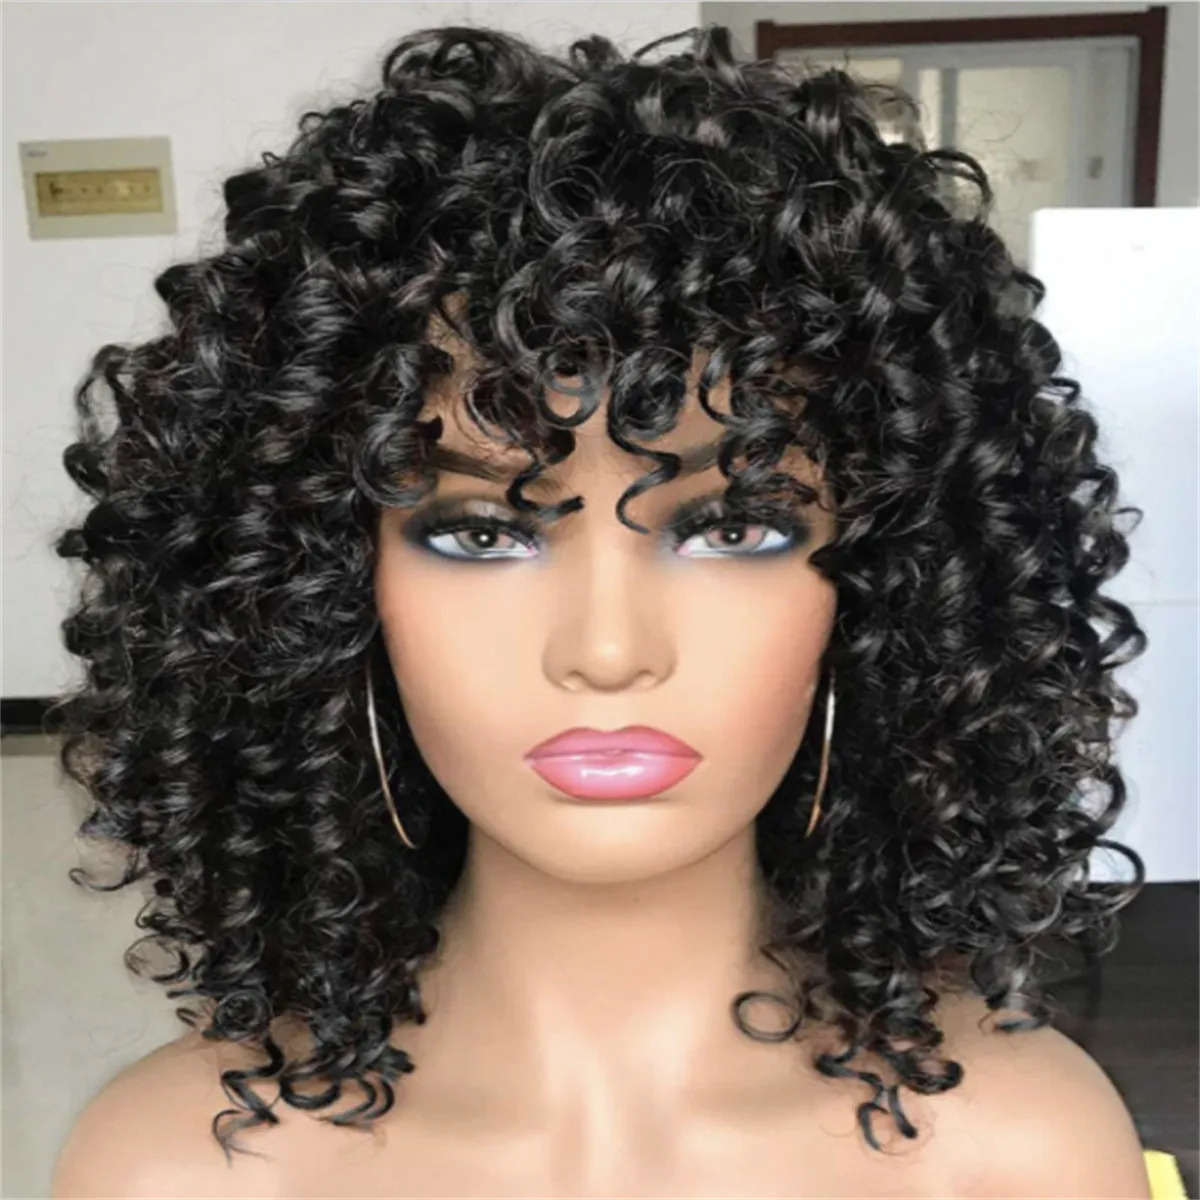 Fashion Women Synthetic Natural Curly Afro Wig with Bangs Short Kinky Curly Wigs Black Black Hair